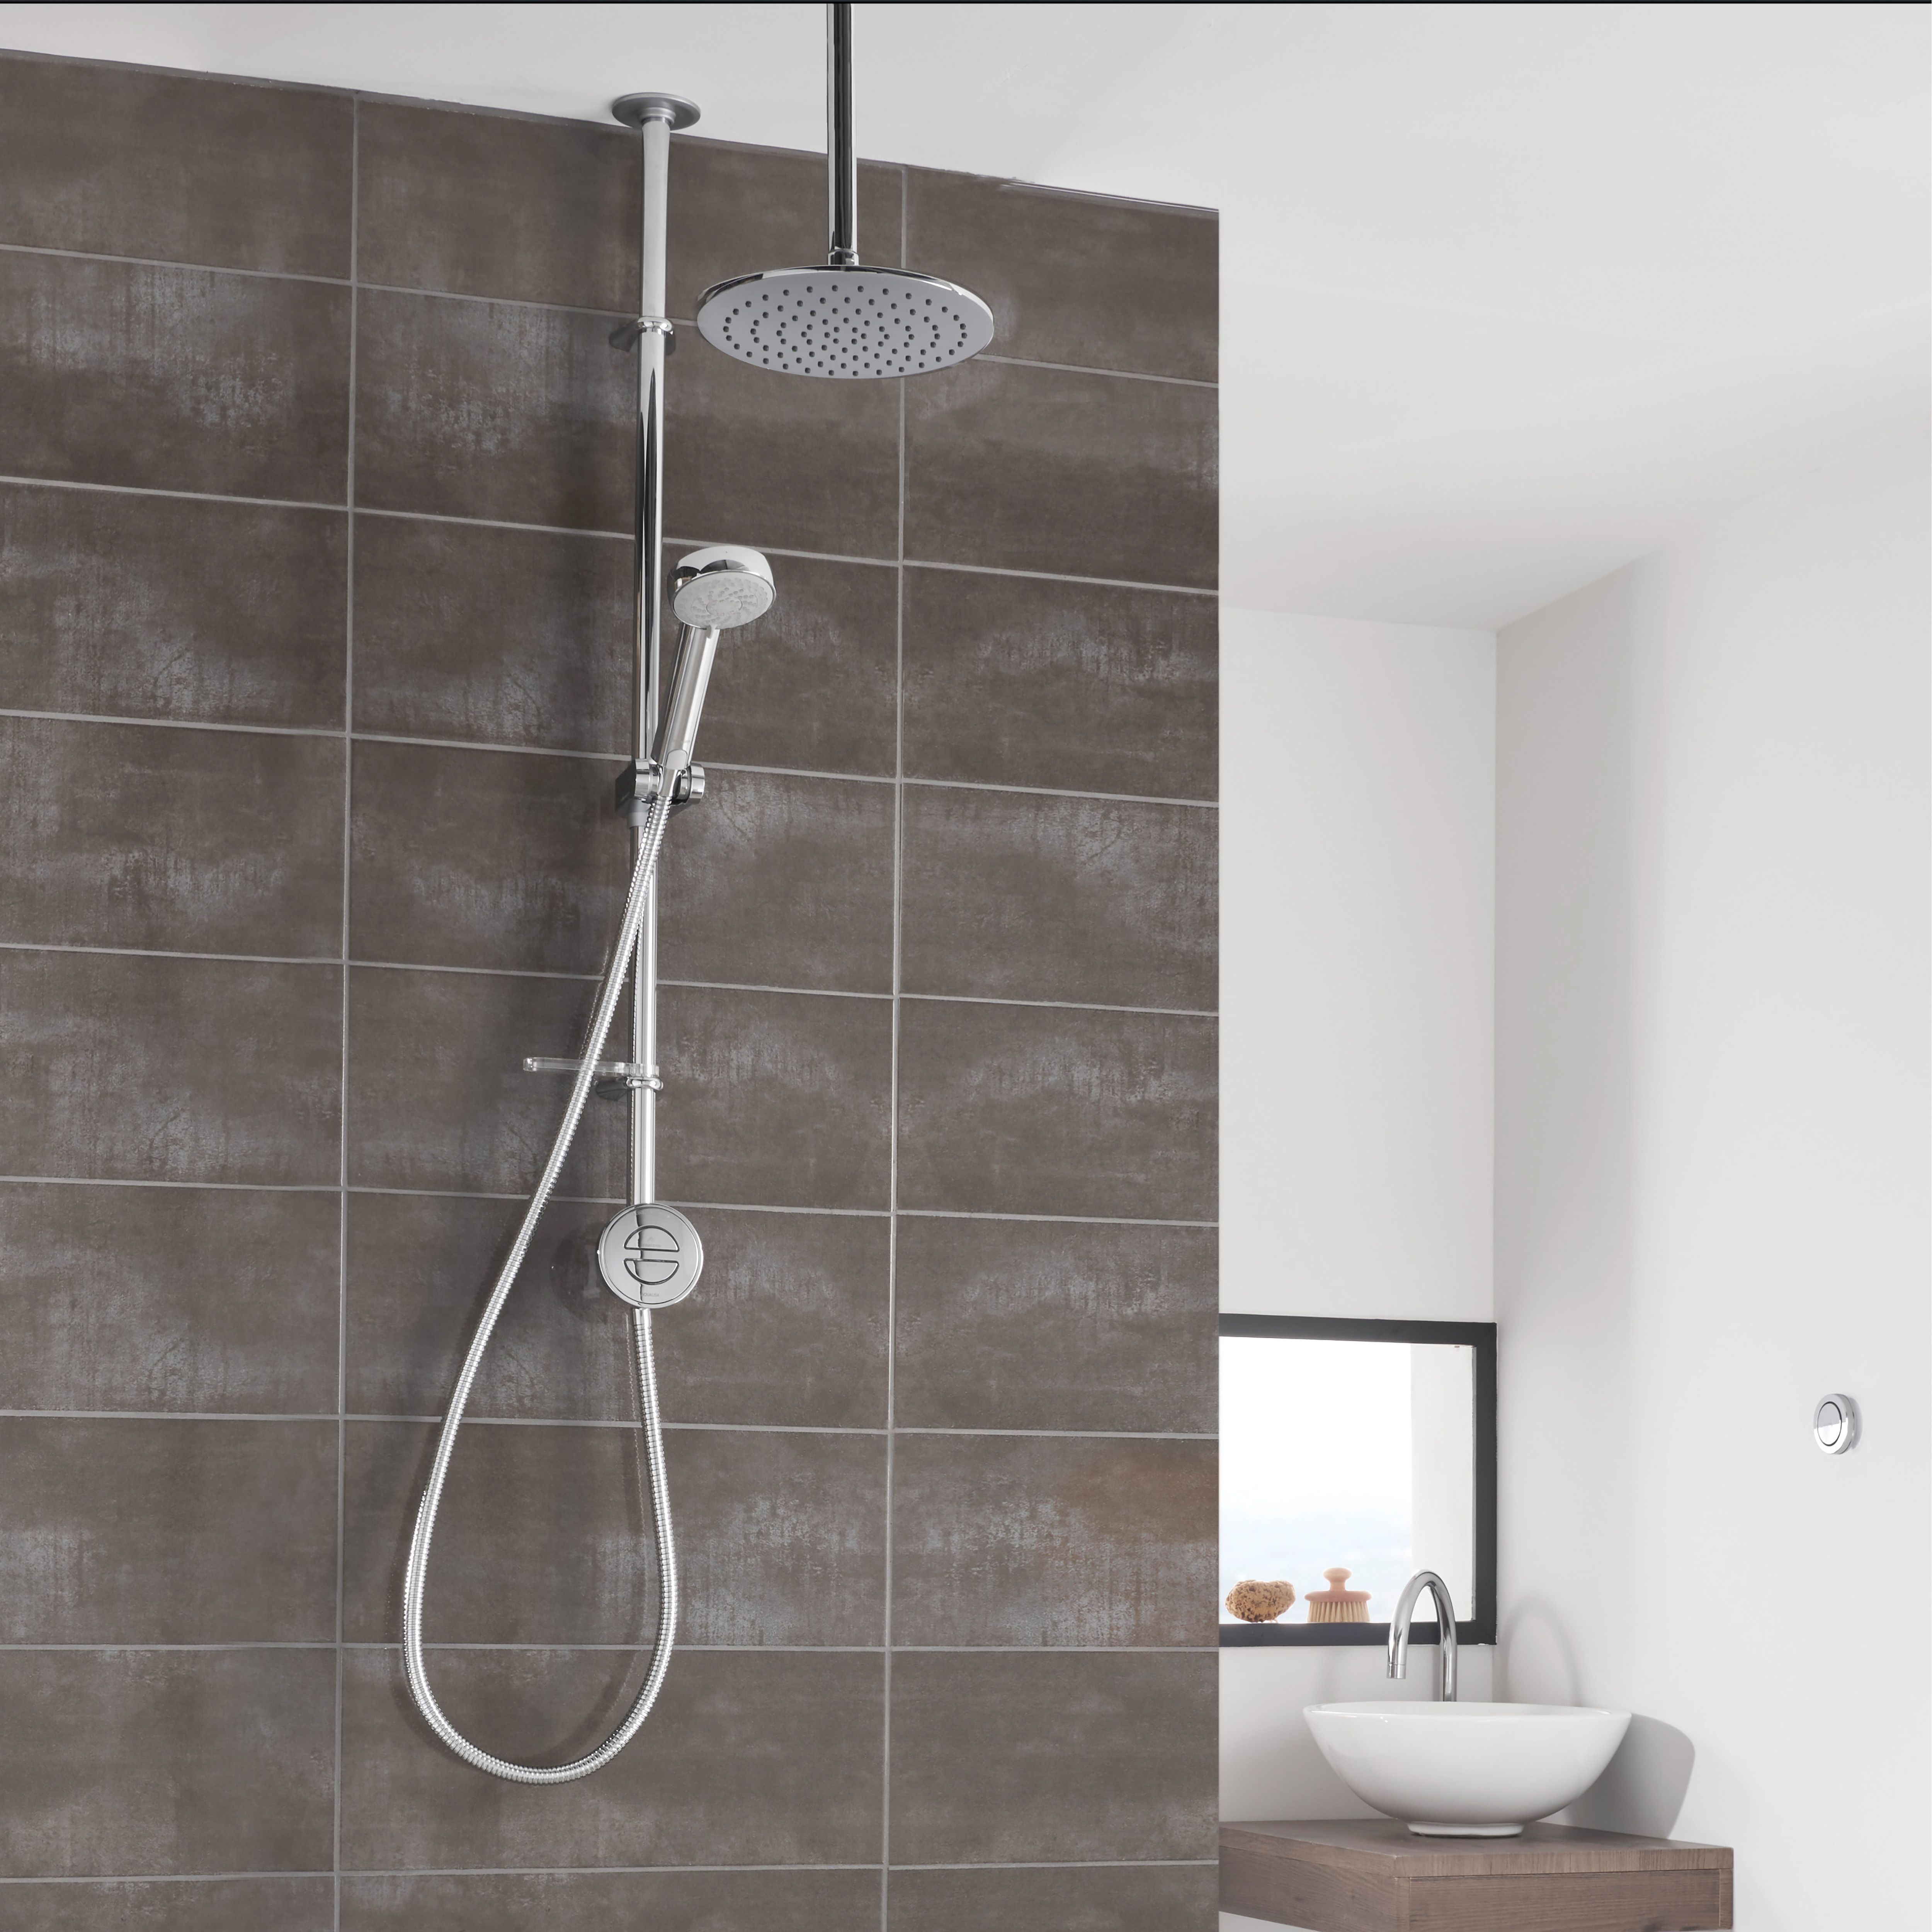 Aqualisa Smart Link Exposed valve Gravity-pumped Ceiling fed Smart Digital Shower with Adjustable & Fixed Shower head